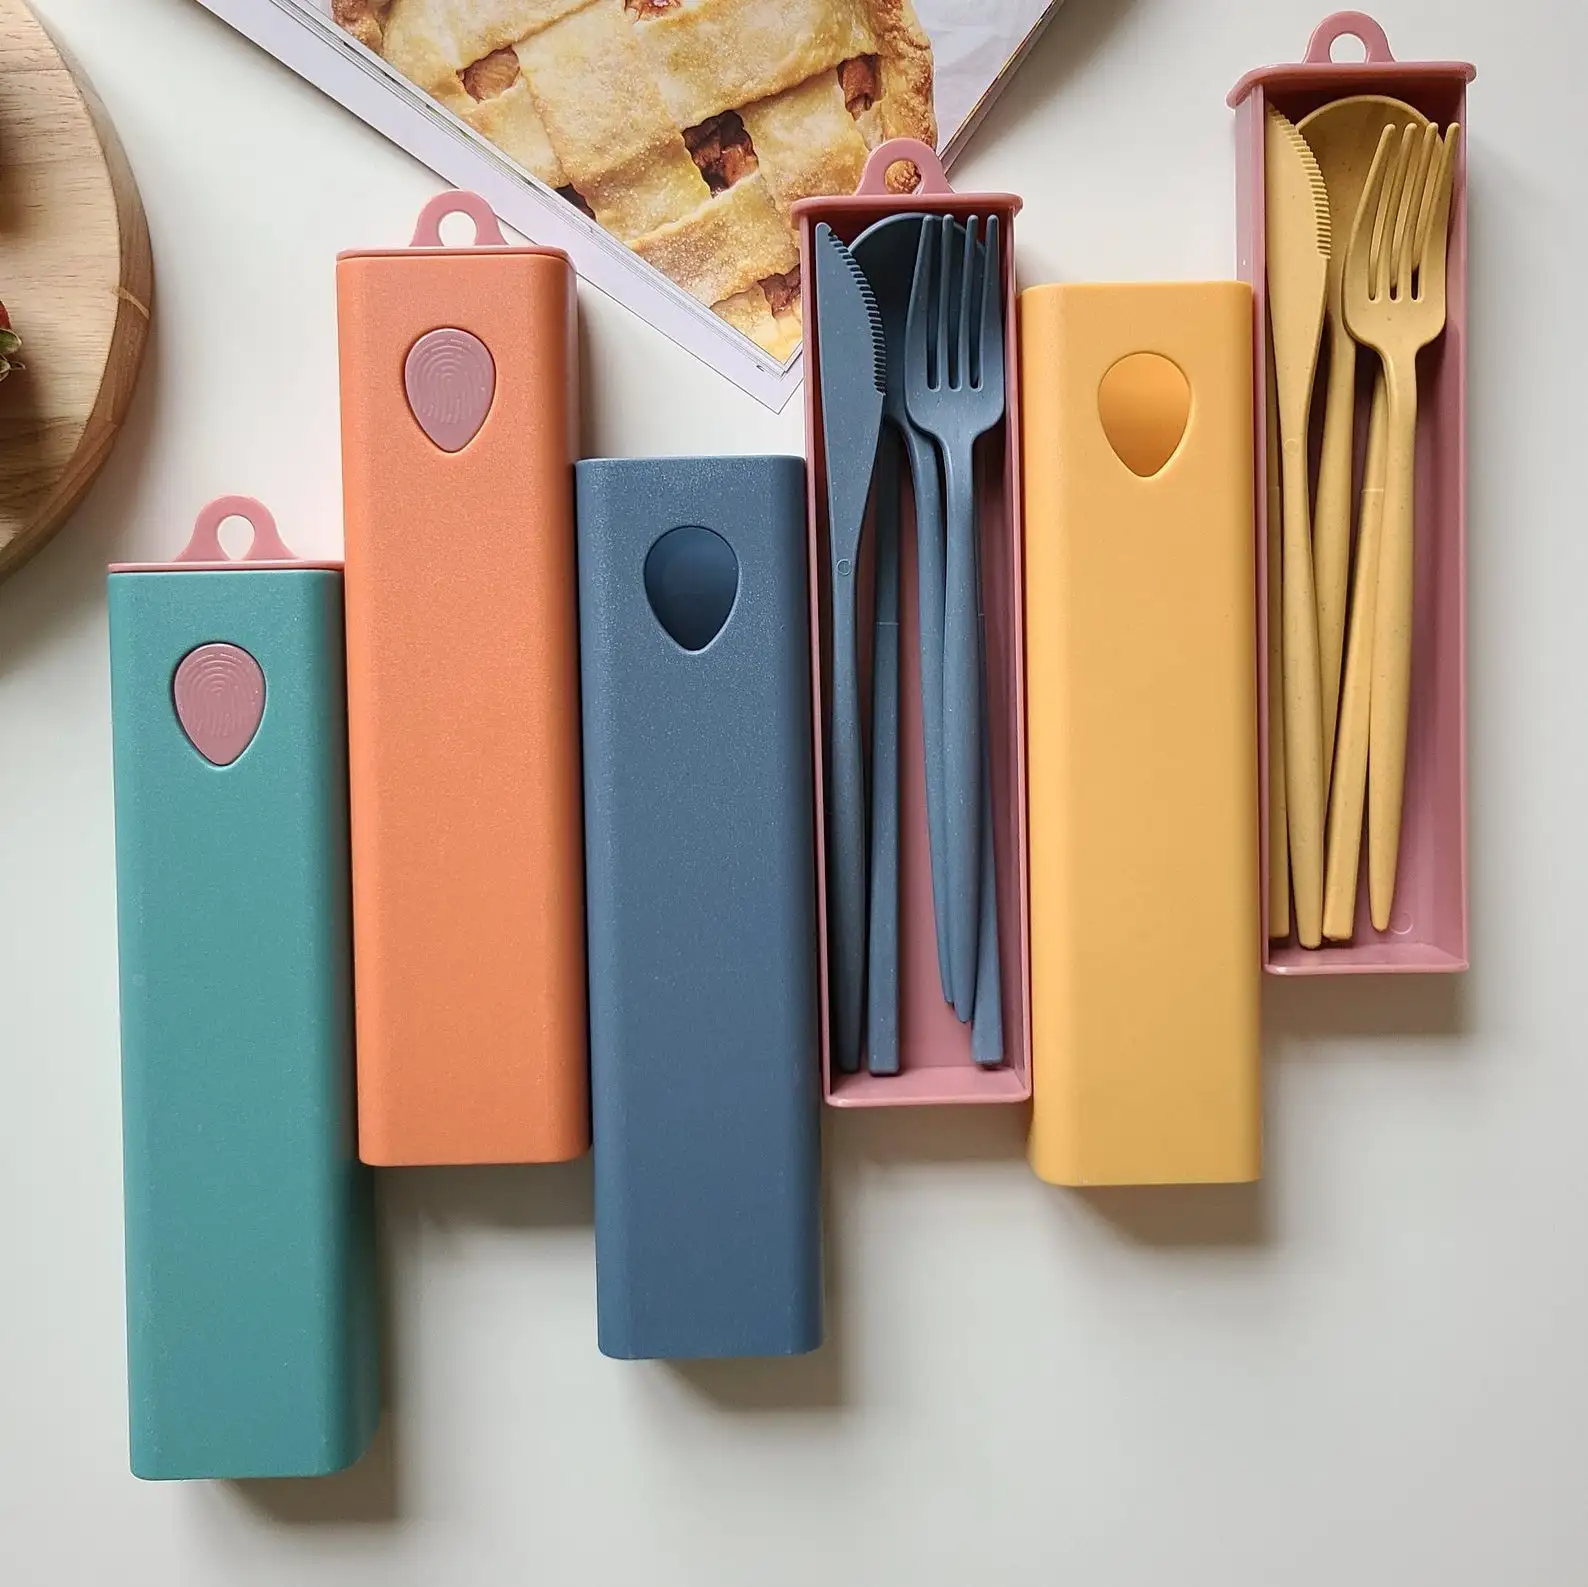 Reusable cutlery sets in colorful carrying cases